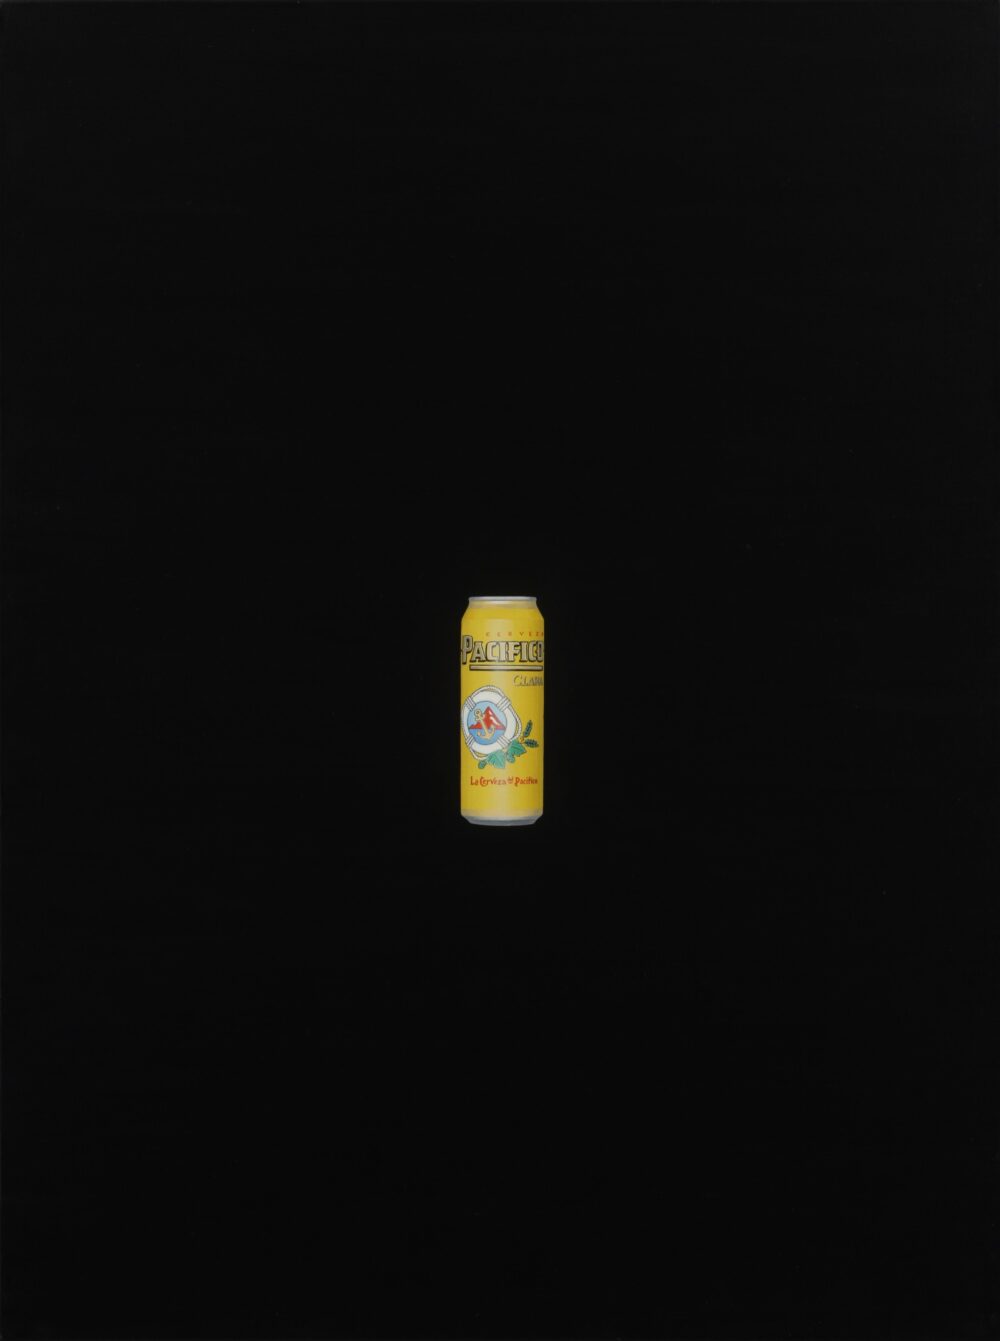 Tall Can Pacifico